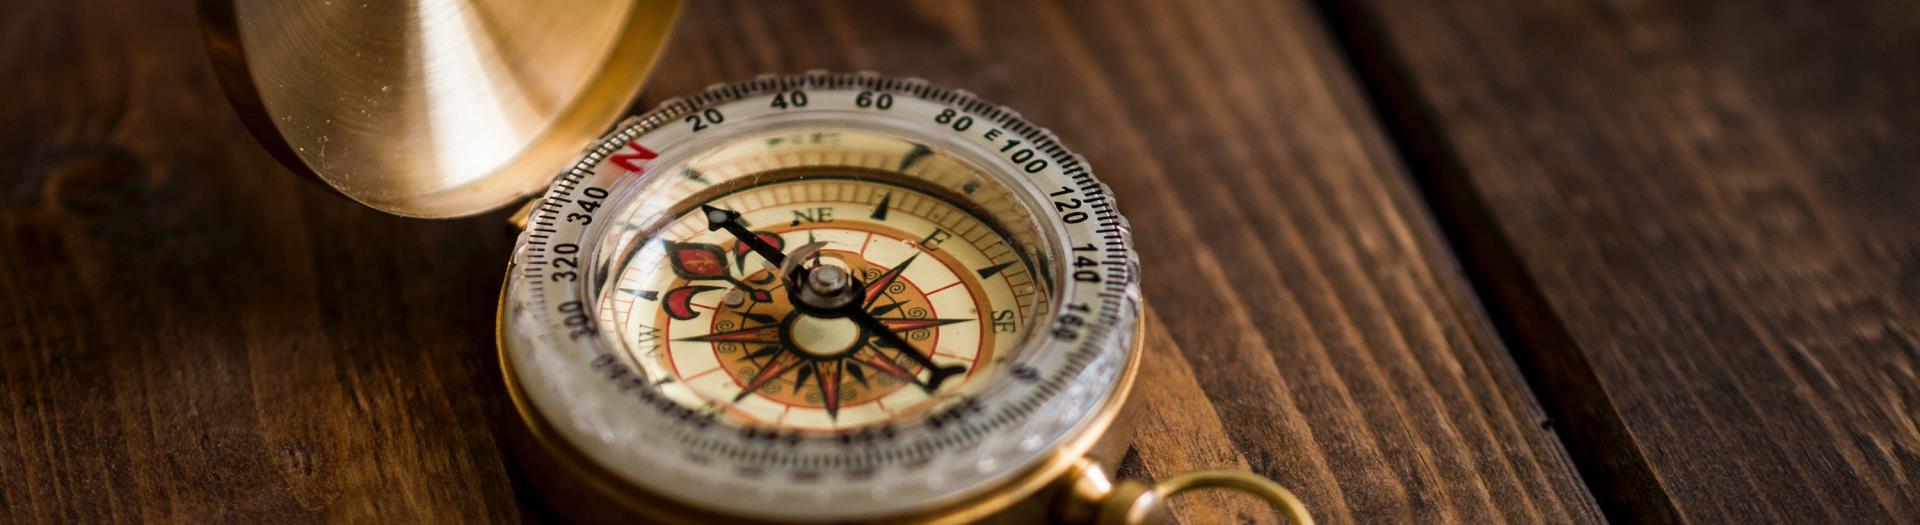 image of a compass on a table